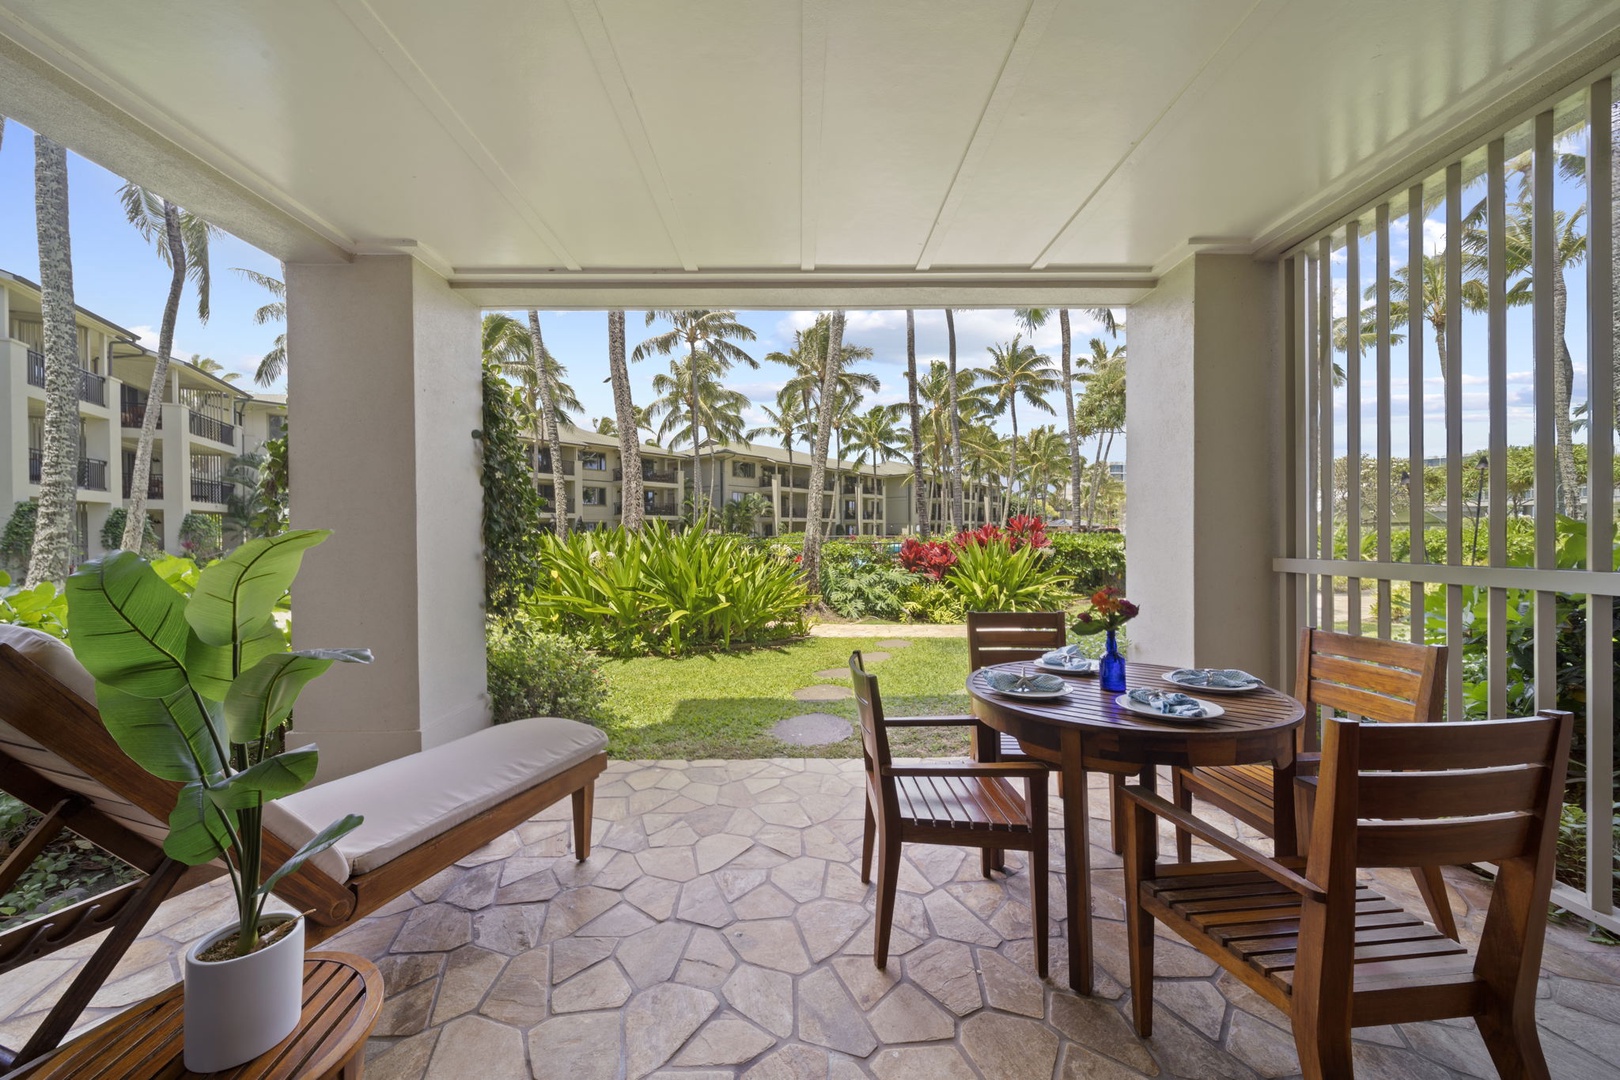 Kahuku Vacation Rentals, Turtle Bay Villas 114 - Garden lanai with outdoor dining set and chaise lounge